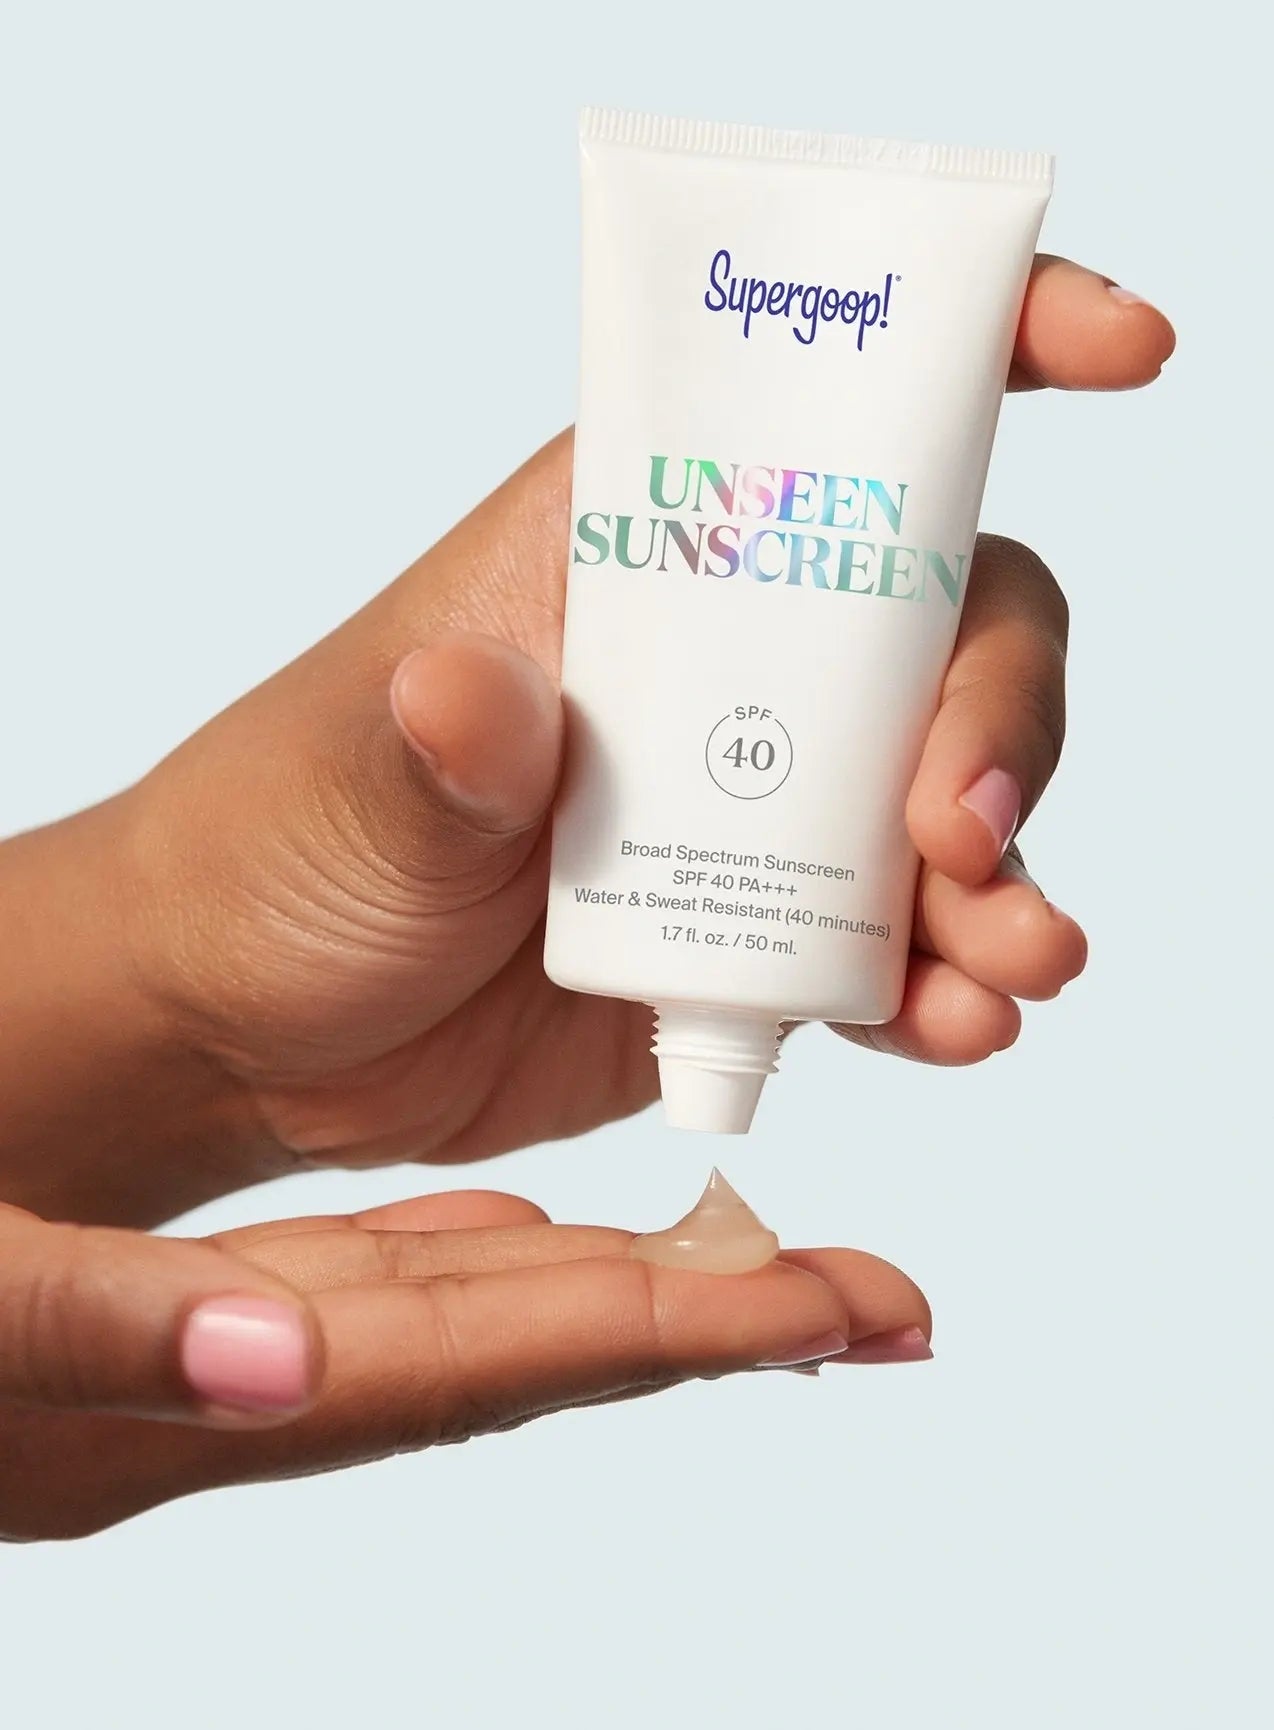 Supergoop Unseen Sunscreen SPF 40 being squeezed out on someone&